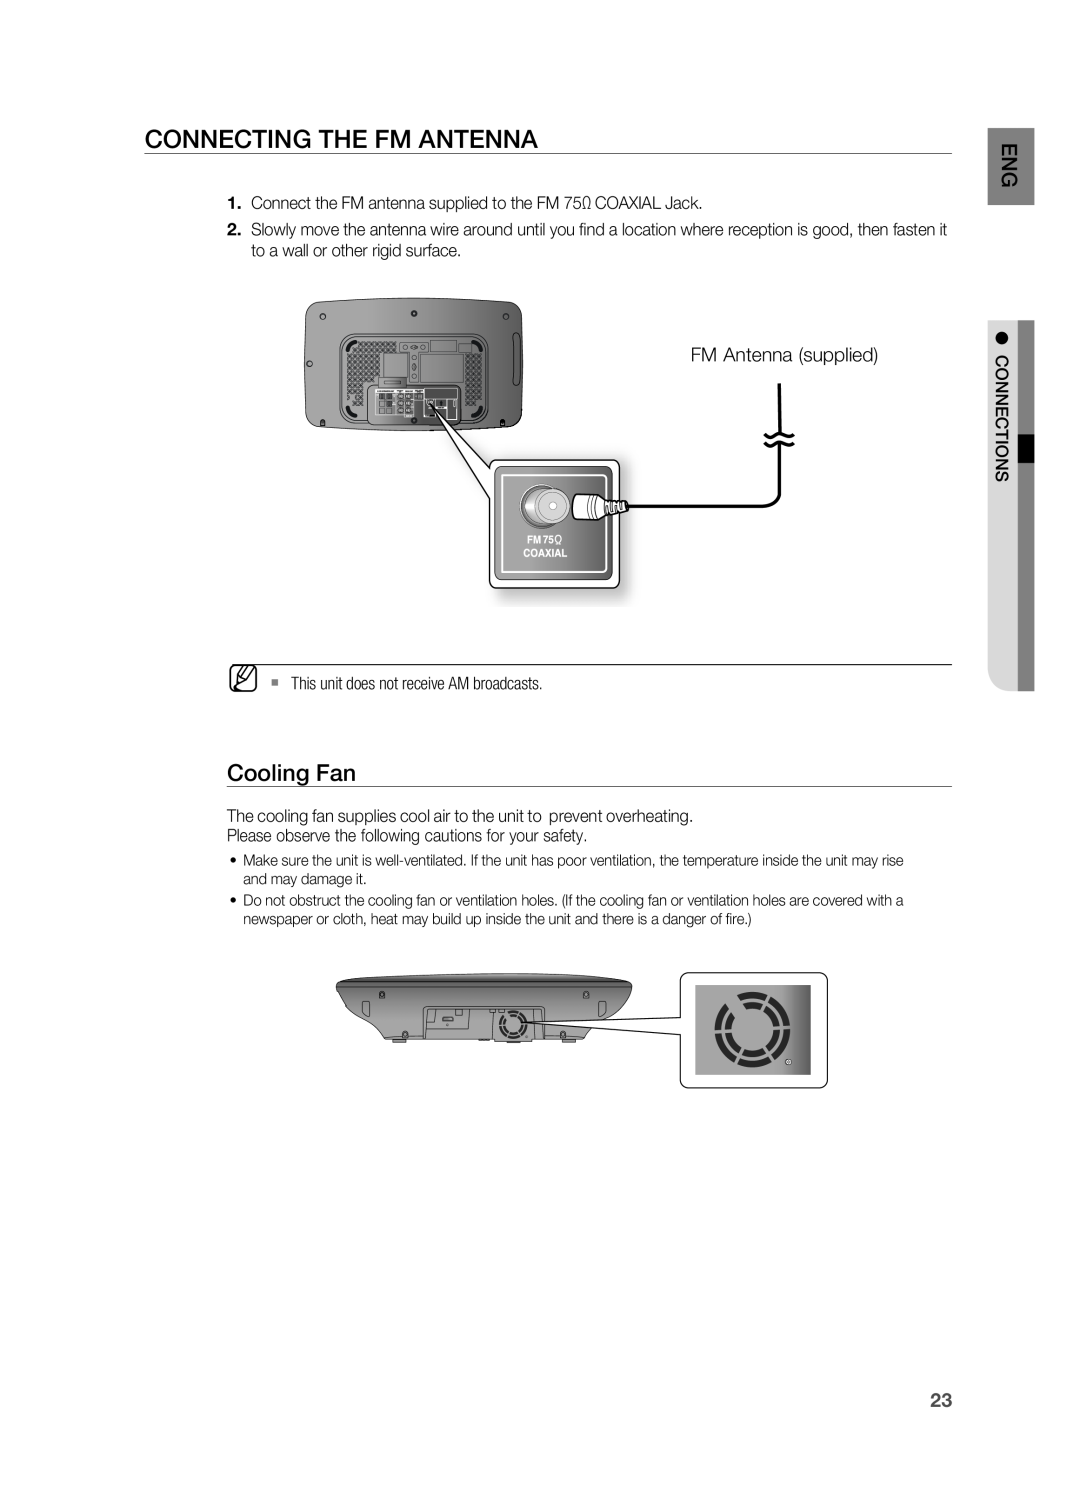 Samsung HT-X710 user manual Connecting The Fm Antenna, Cooling Fan 